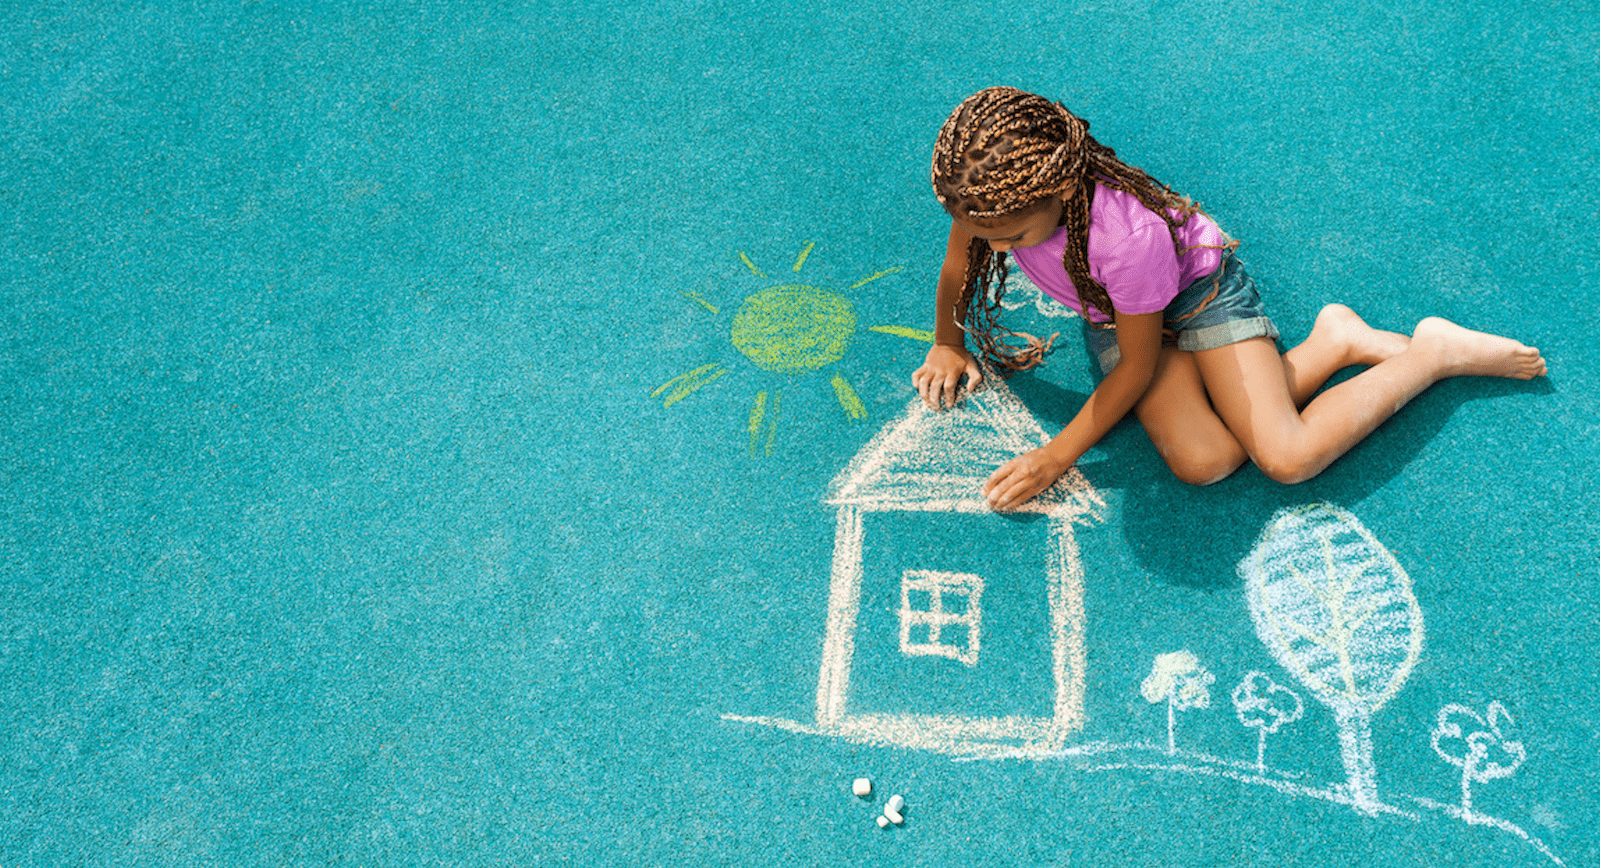 Girl drawing house on pavement with chalk